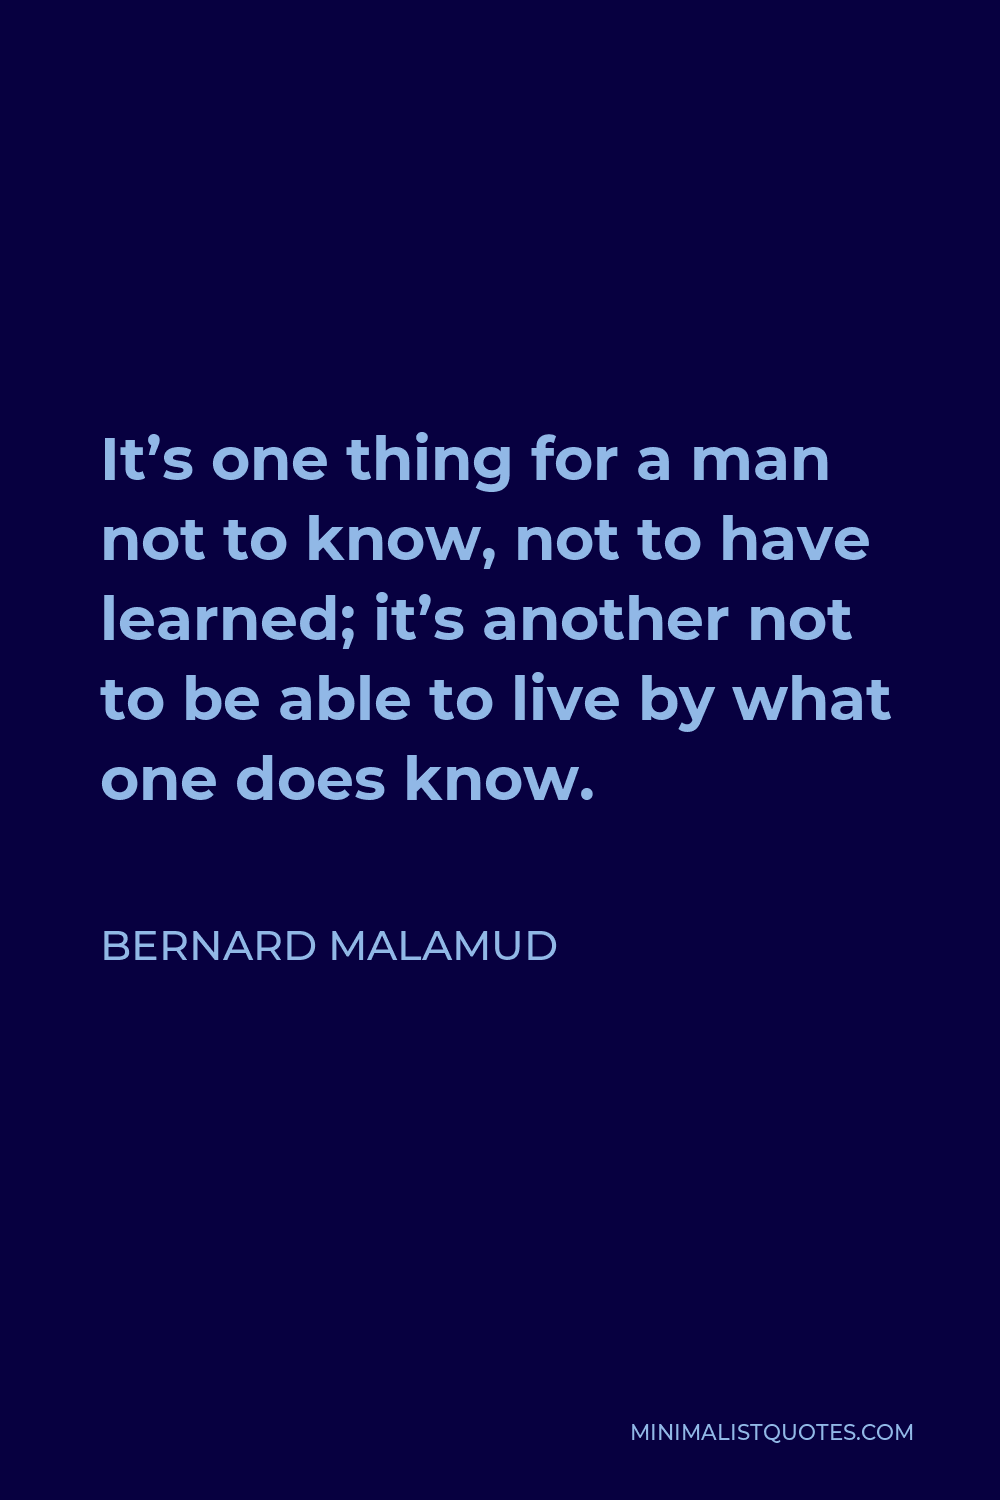 Bernard Malamud Quote - It’s one thing for a man not to know, not to have learned; it’s another not to be able to live by what one does know.